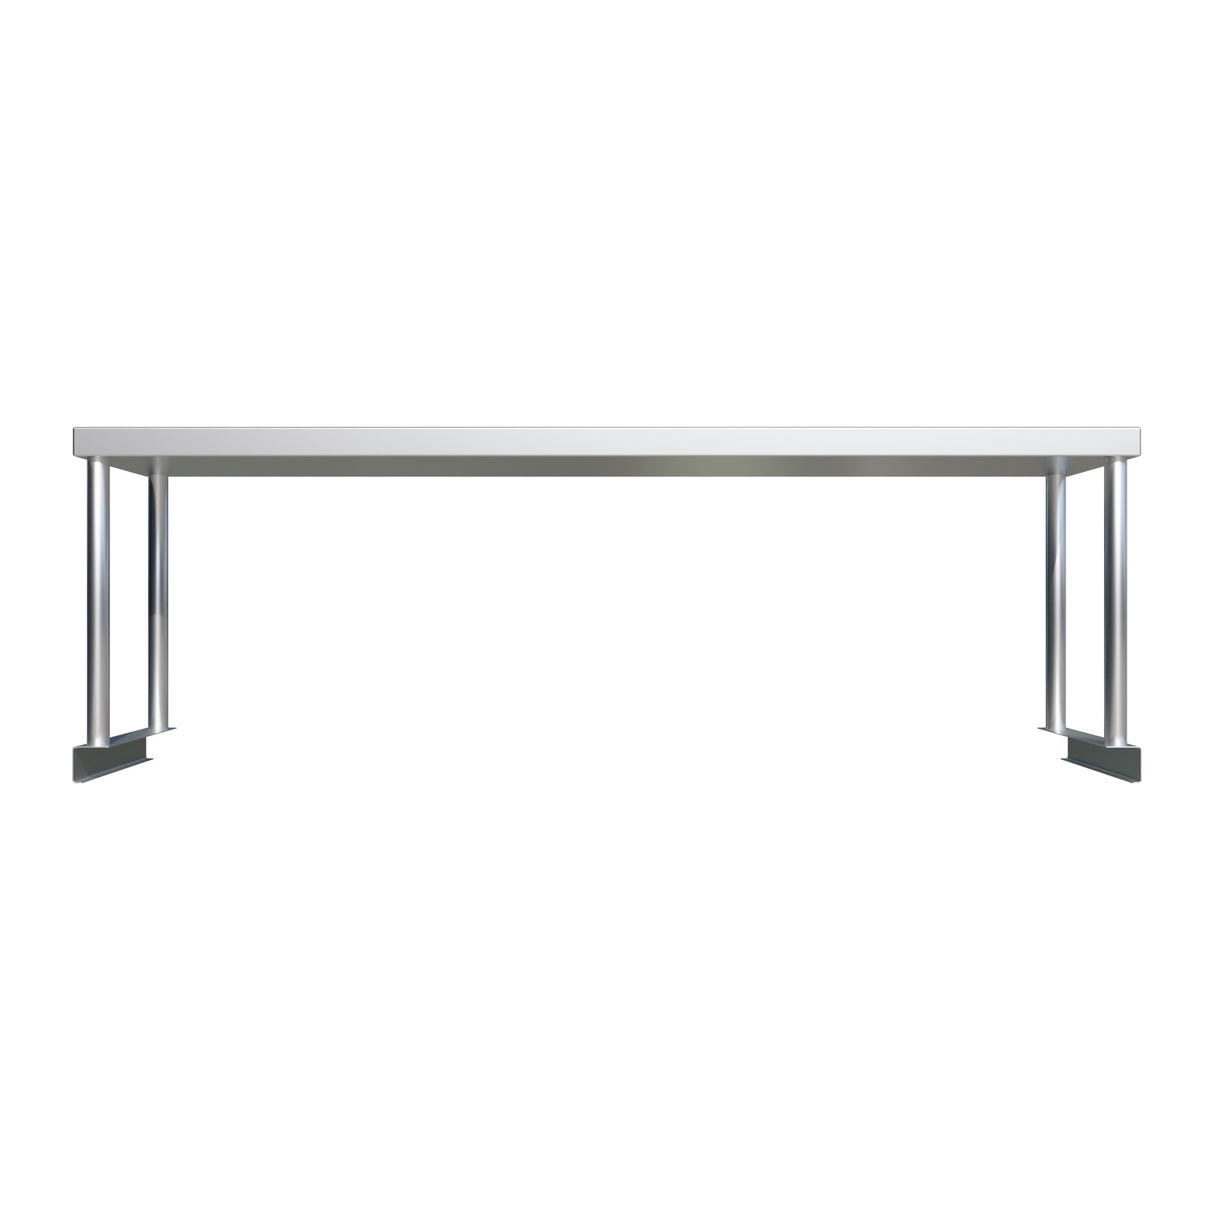 Empire Stainless Steel Single Over Shelf 1200mm Wide - OS-1200